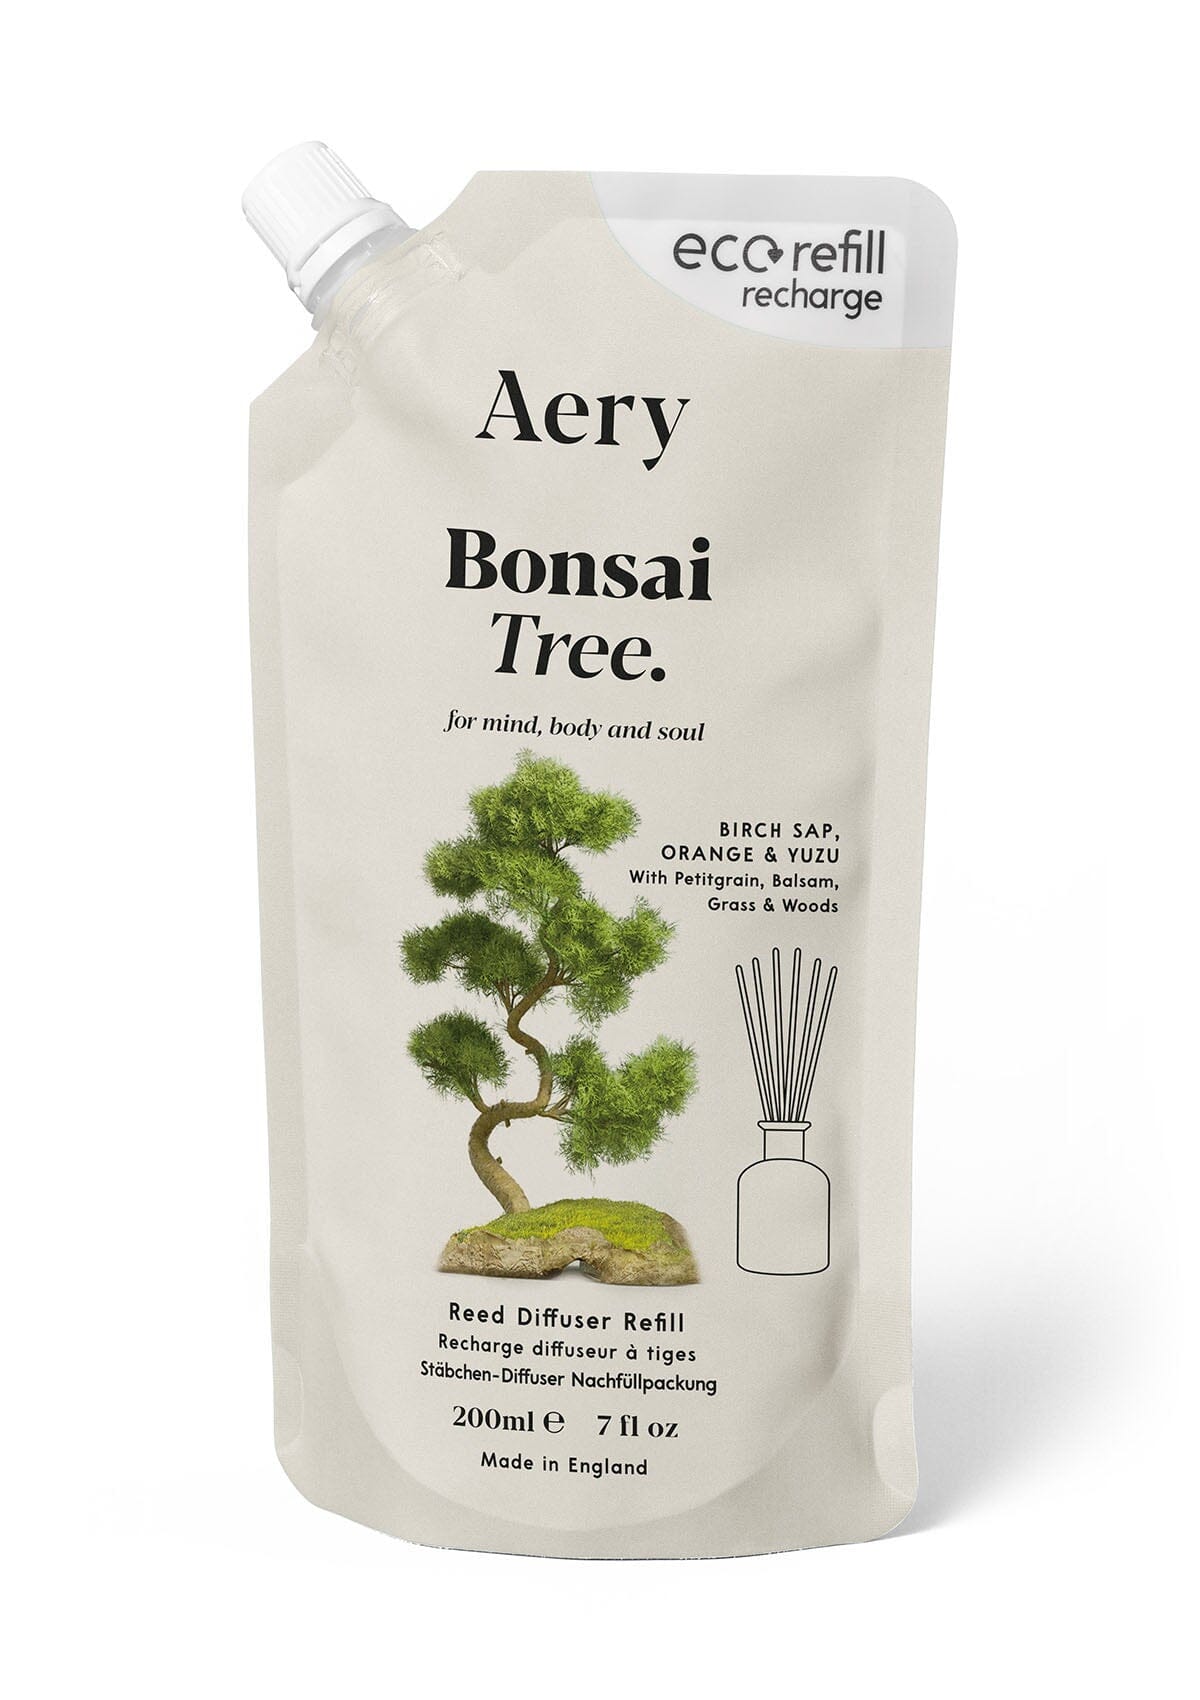 Bonsai treee redd diffuser refill pouch by aery displayed on white background 